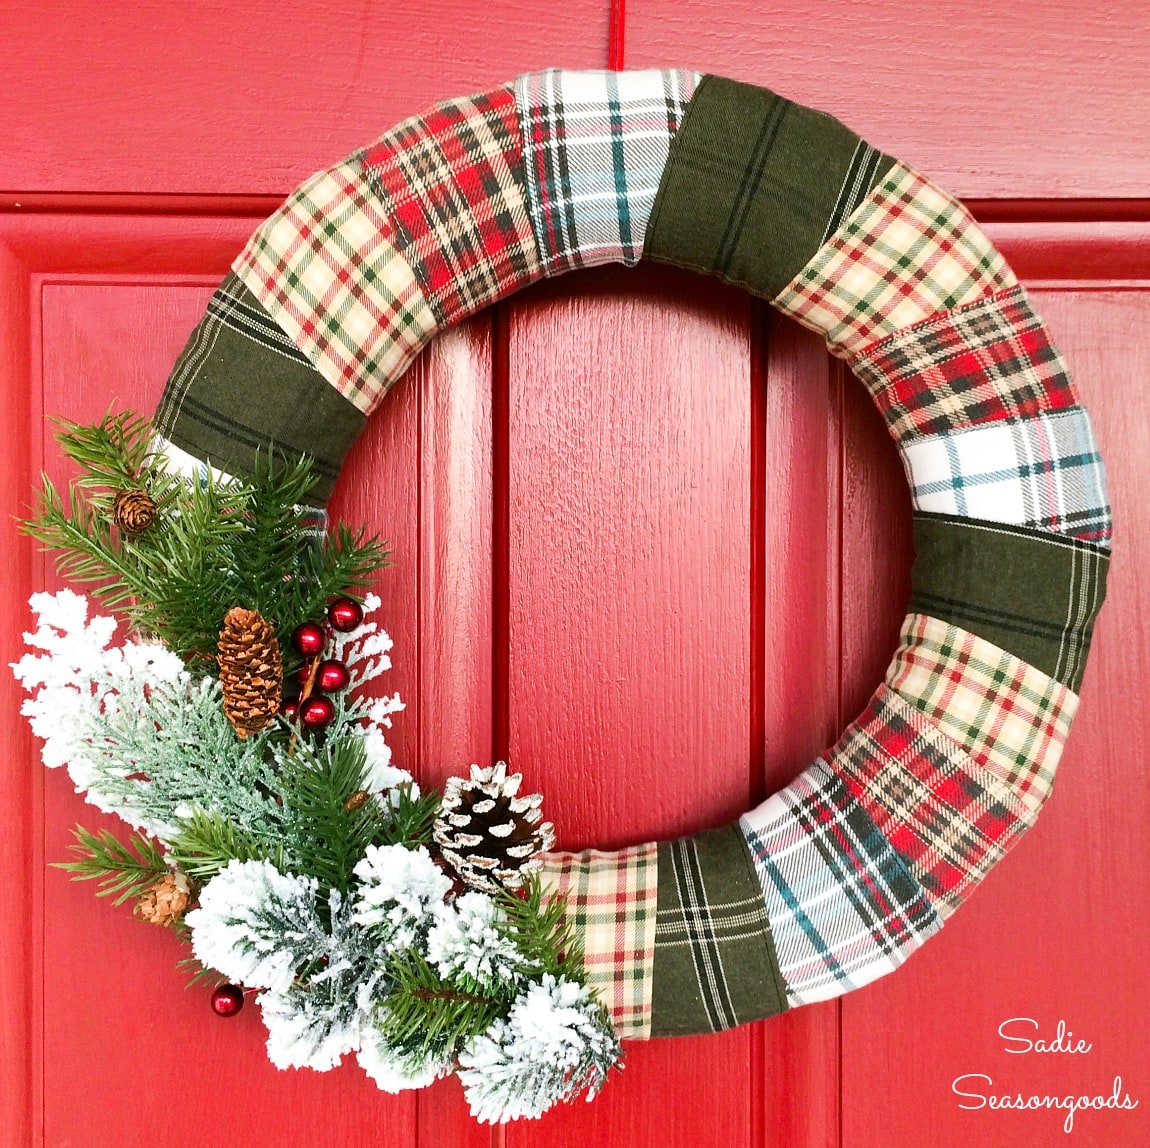 https://www.sadieseasongoods.com/wp-content/uploads/2015/12/plaid-christmas-wreath-from-recycled-flannel-shirts.jpg